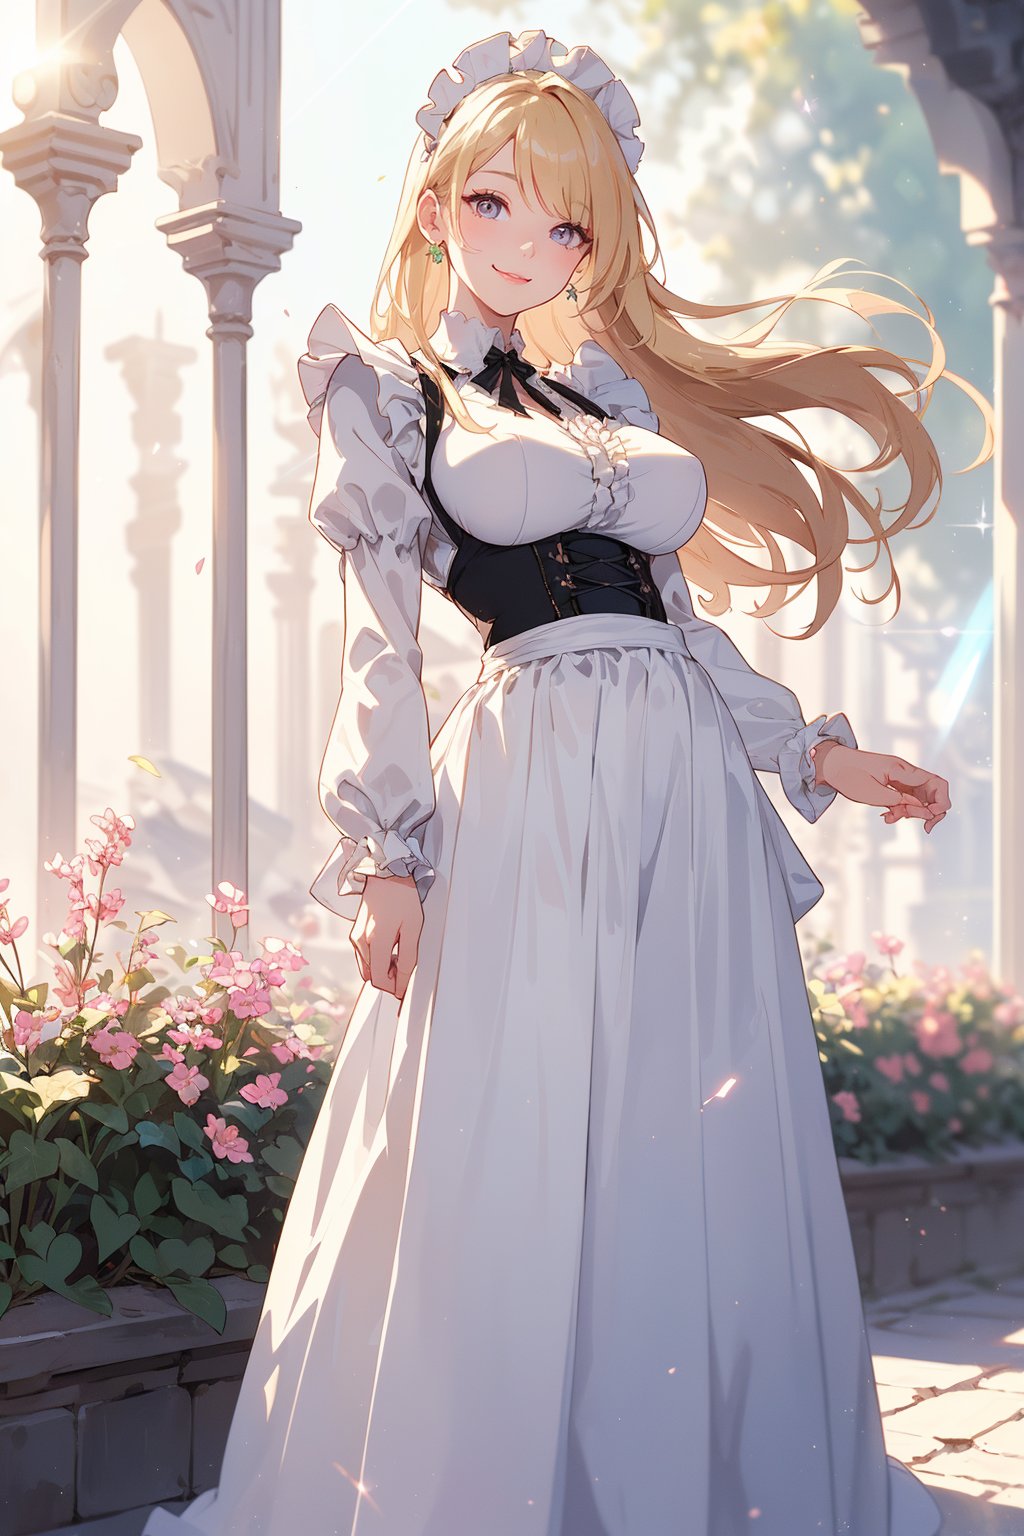 (masterpiece),  best quality,  ultra-detailed,  (digital illustration:1.3),  1 woman,  (cute:1.3),  shiny (blonde) long hair,  swept bangs, (highly detailed beautiful European eyes:1.3),  
(huge breasts,  underbust),  full body,  seductive smile, 
BREAK
(white theme:1.6),  Collar,  Ruffled,  Catsuits,  Cuffs, (Frilled Blouse Romantic:1.4), , (white maid outfit:1.5), (Gold thread embroidery at hem:0.6), (Medieval Gothic style:1.2), (long Skirt:1.4), Long Sleeve, 
(simple pastel color background,  garden:1.4),  best lighting,  bokeh,  (lens flare,  light particles:1.3),  (bloom,  soft focus:1.4),
